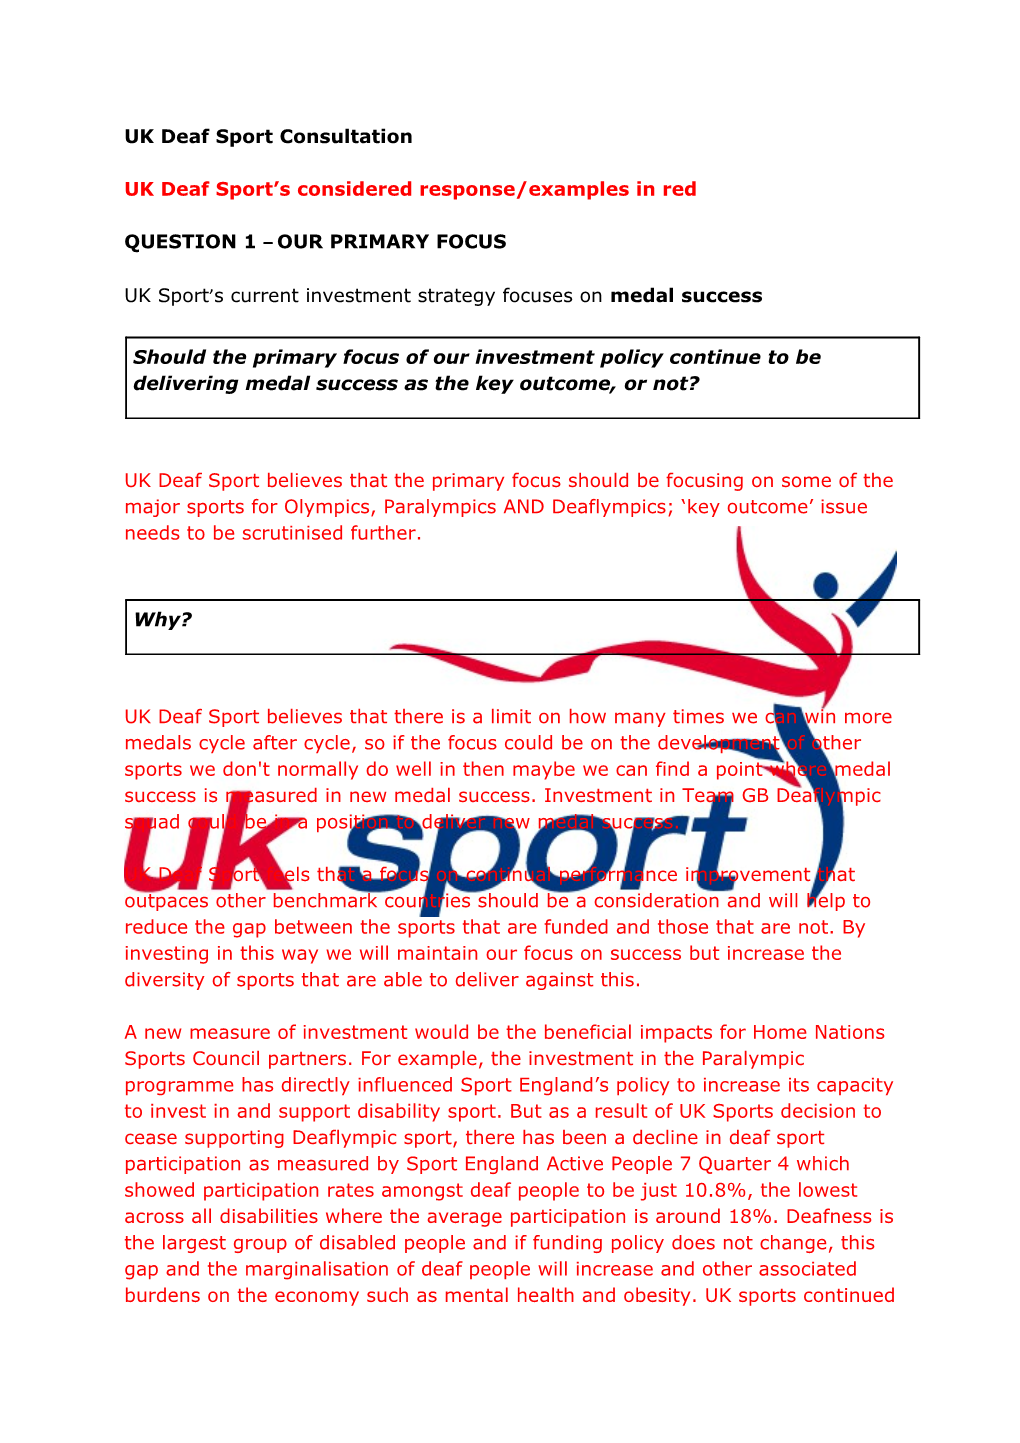 UK Deaf Sport S Considered Response/Examples in Red